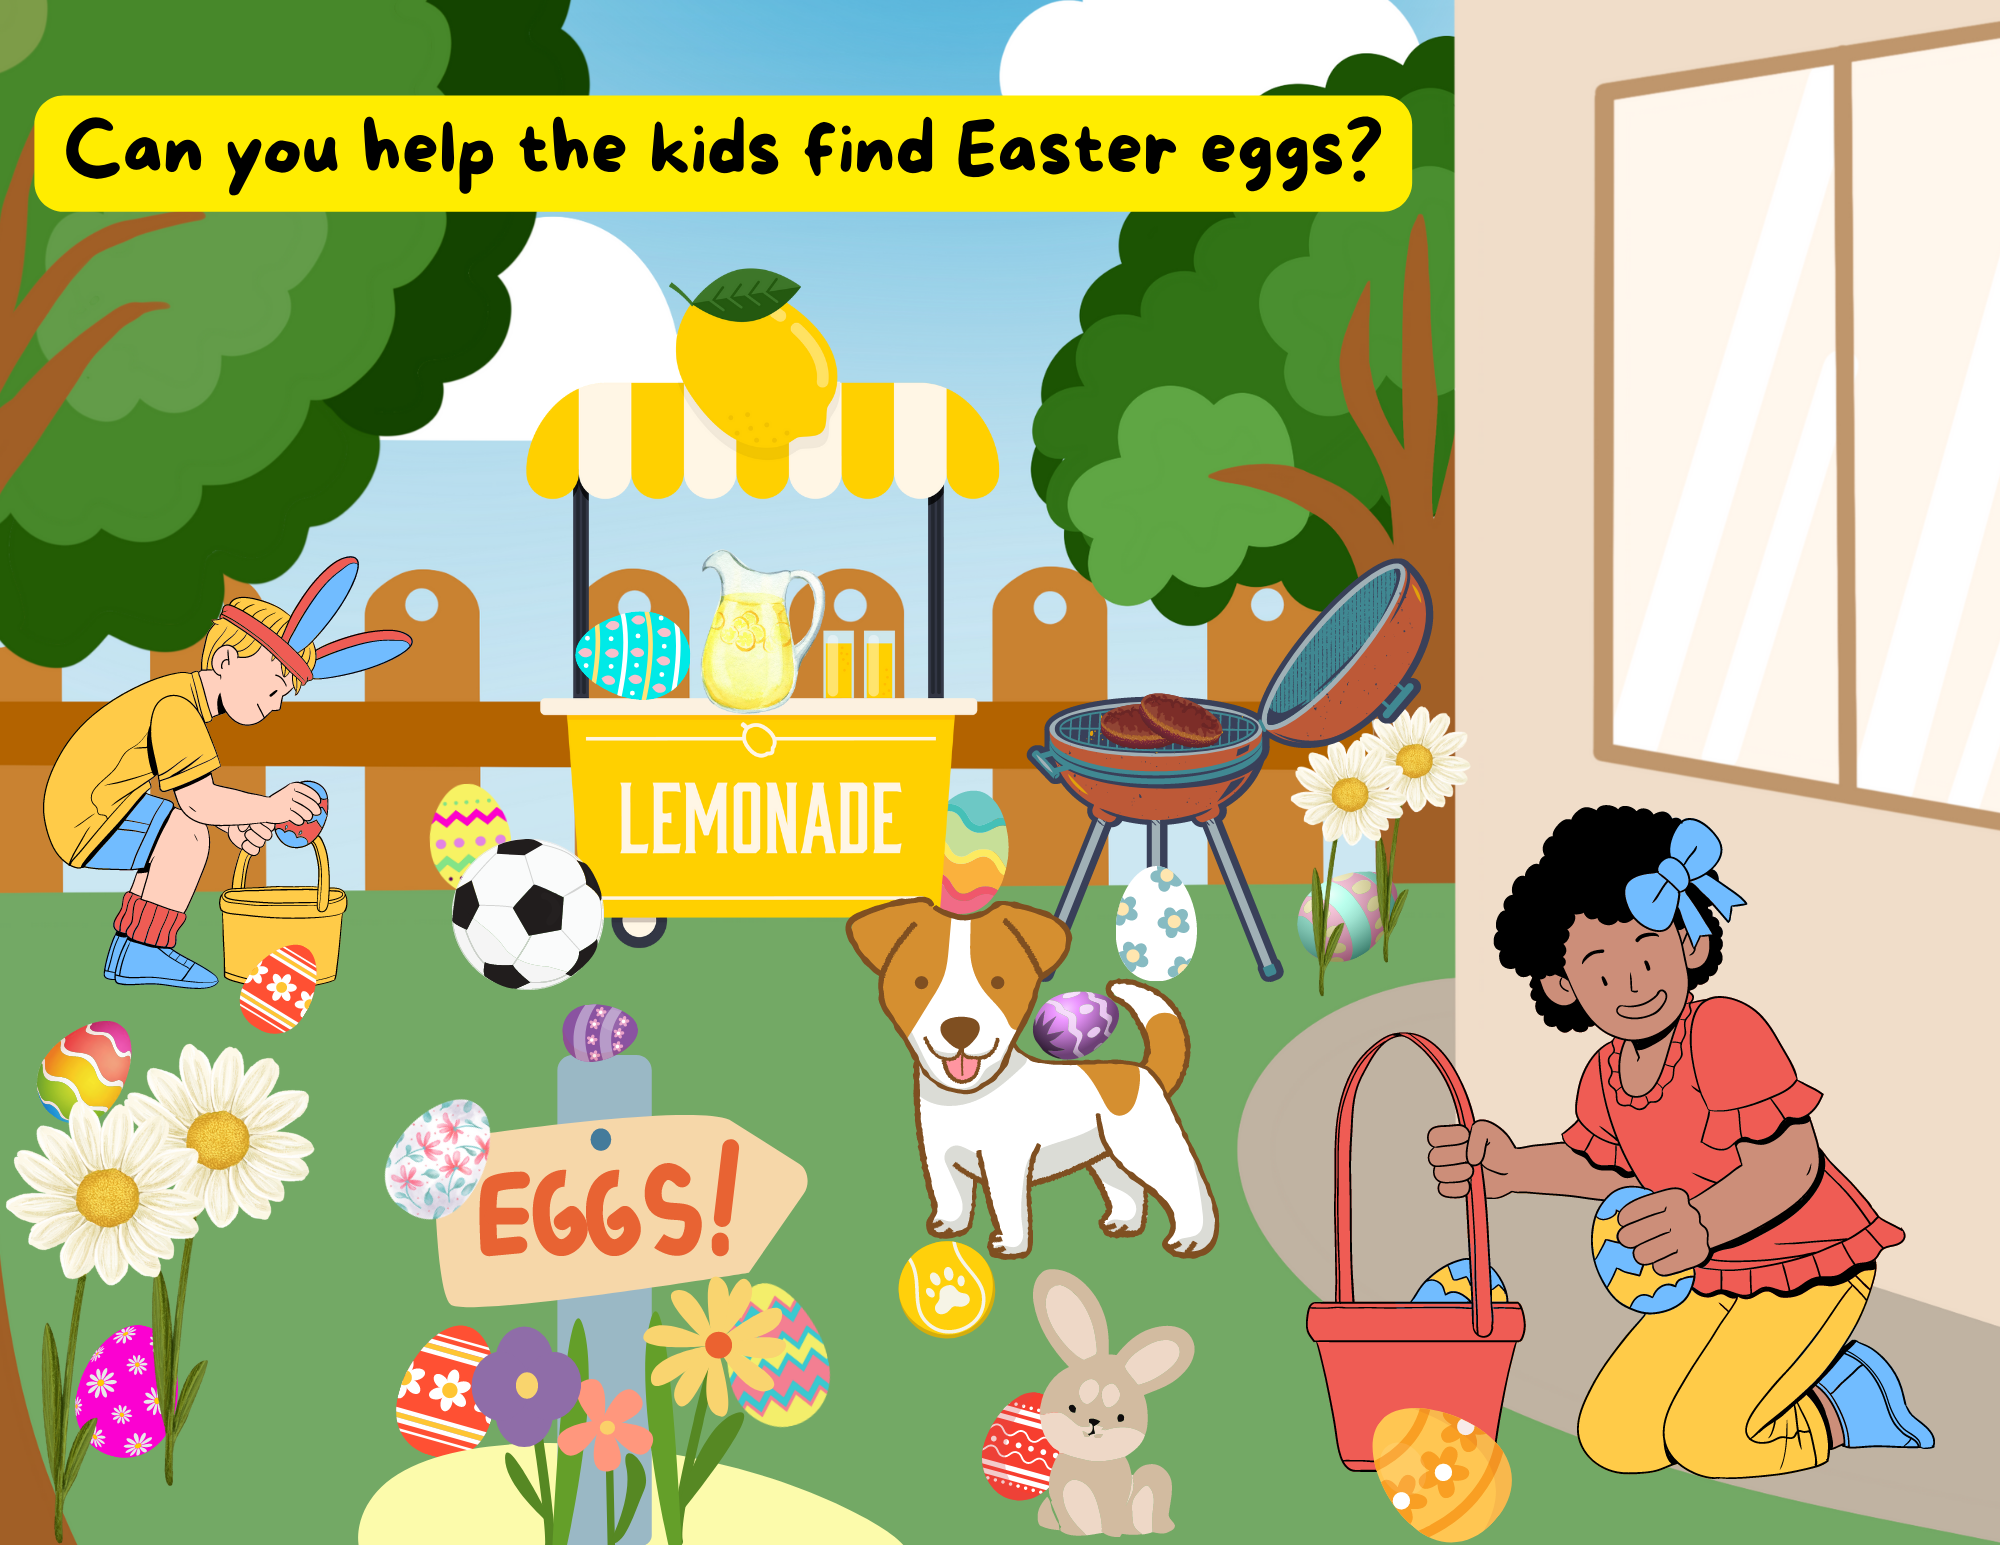 Can you help the kids find easter eggs?